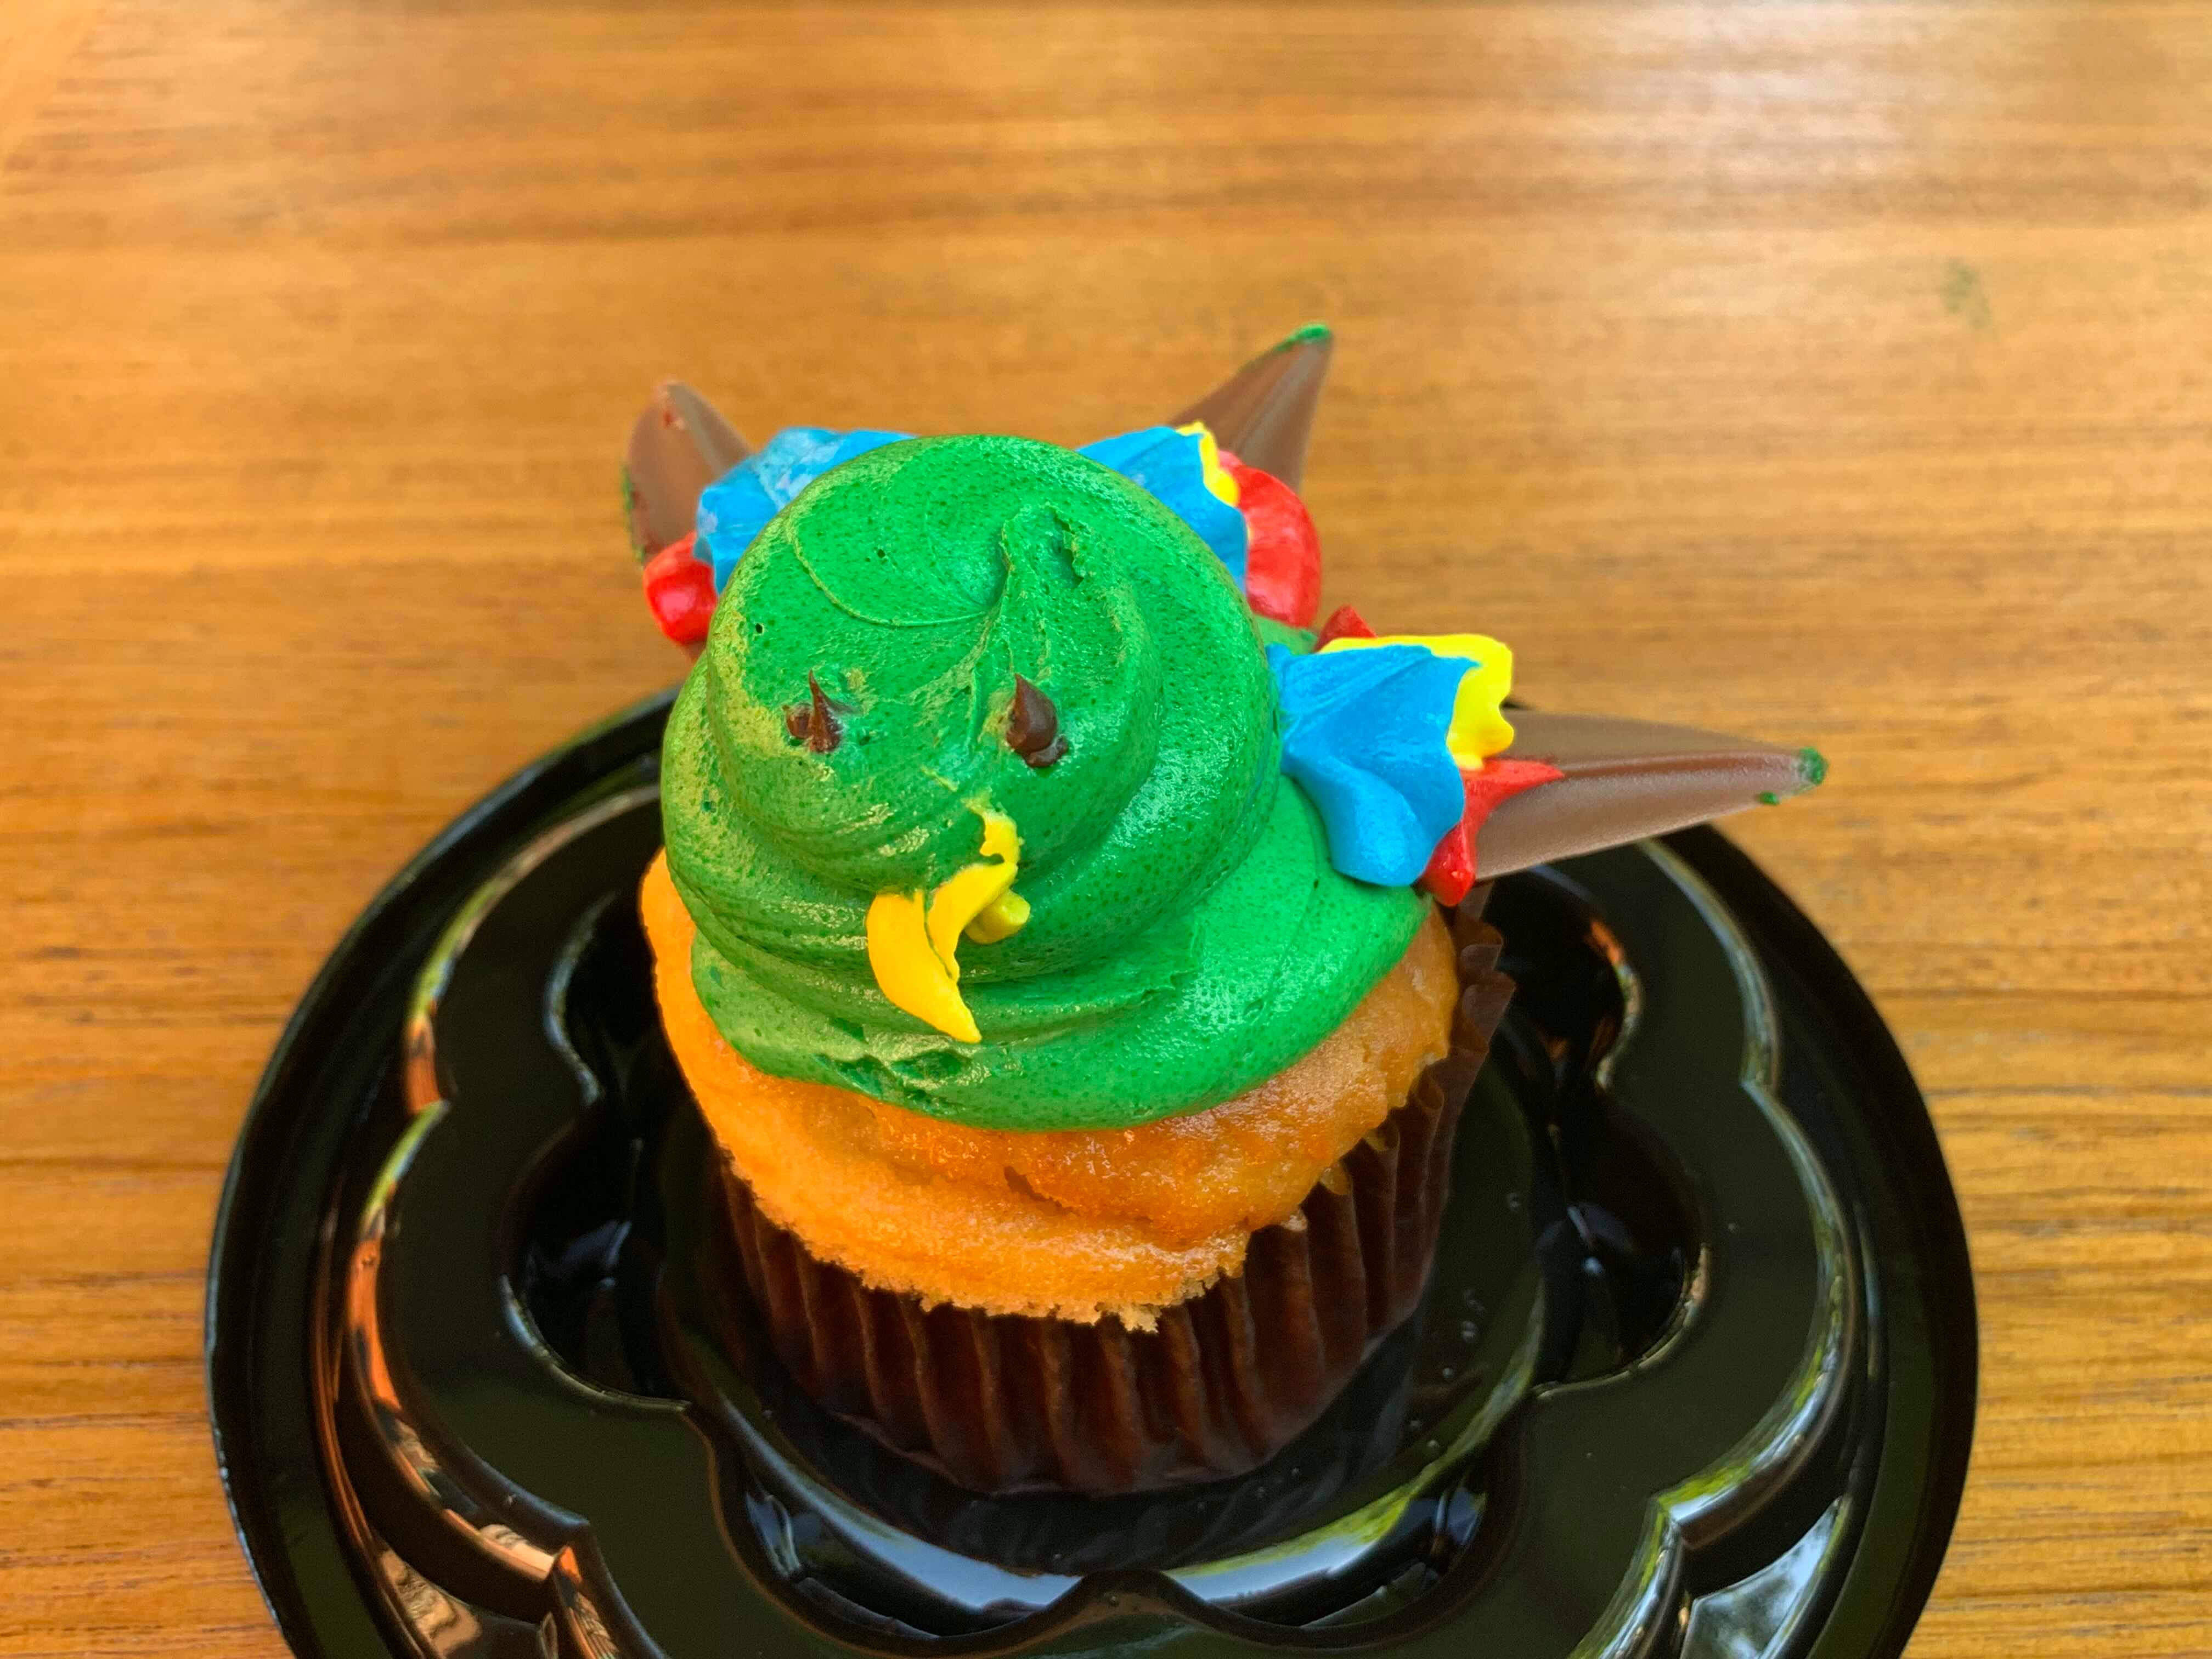 New Bird Cupcake is Now Available at Disney’s Animal Kingdom